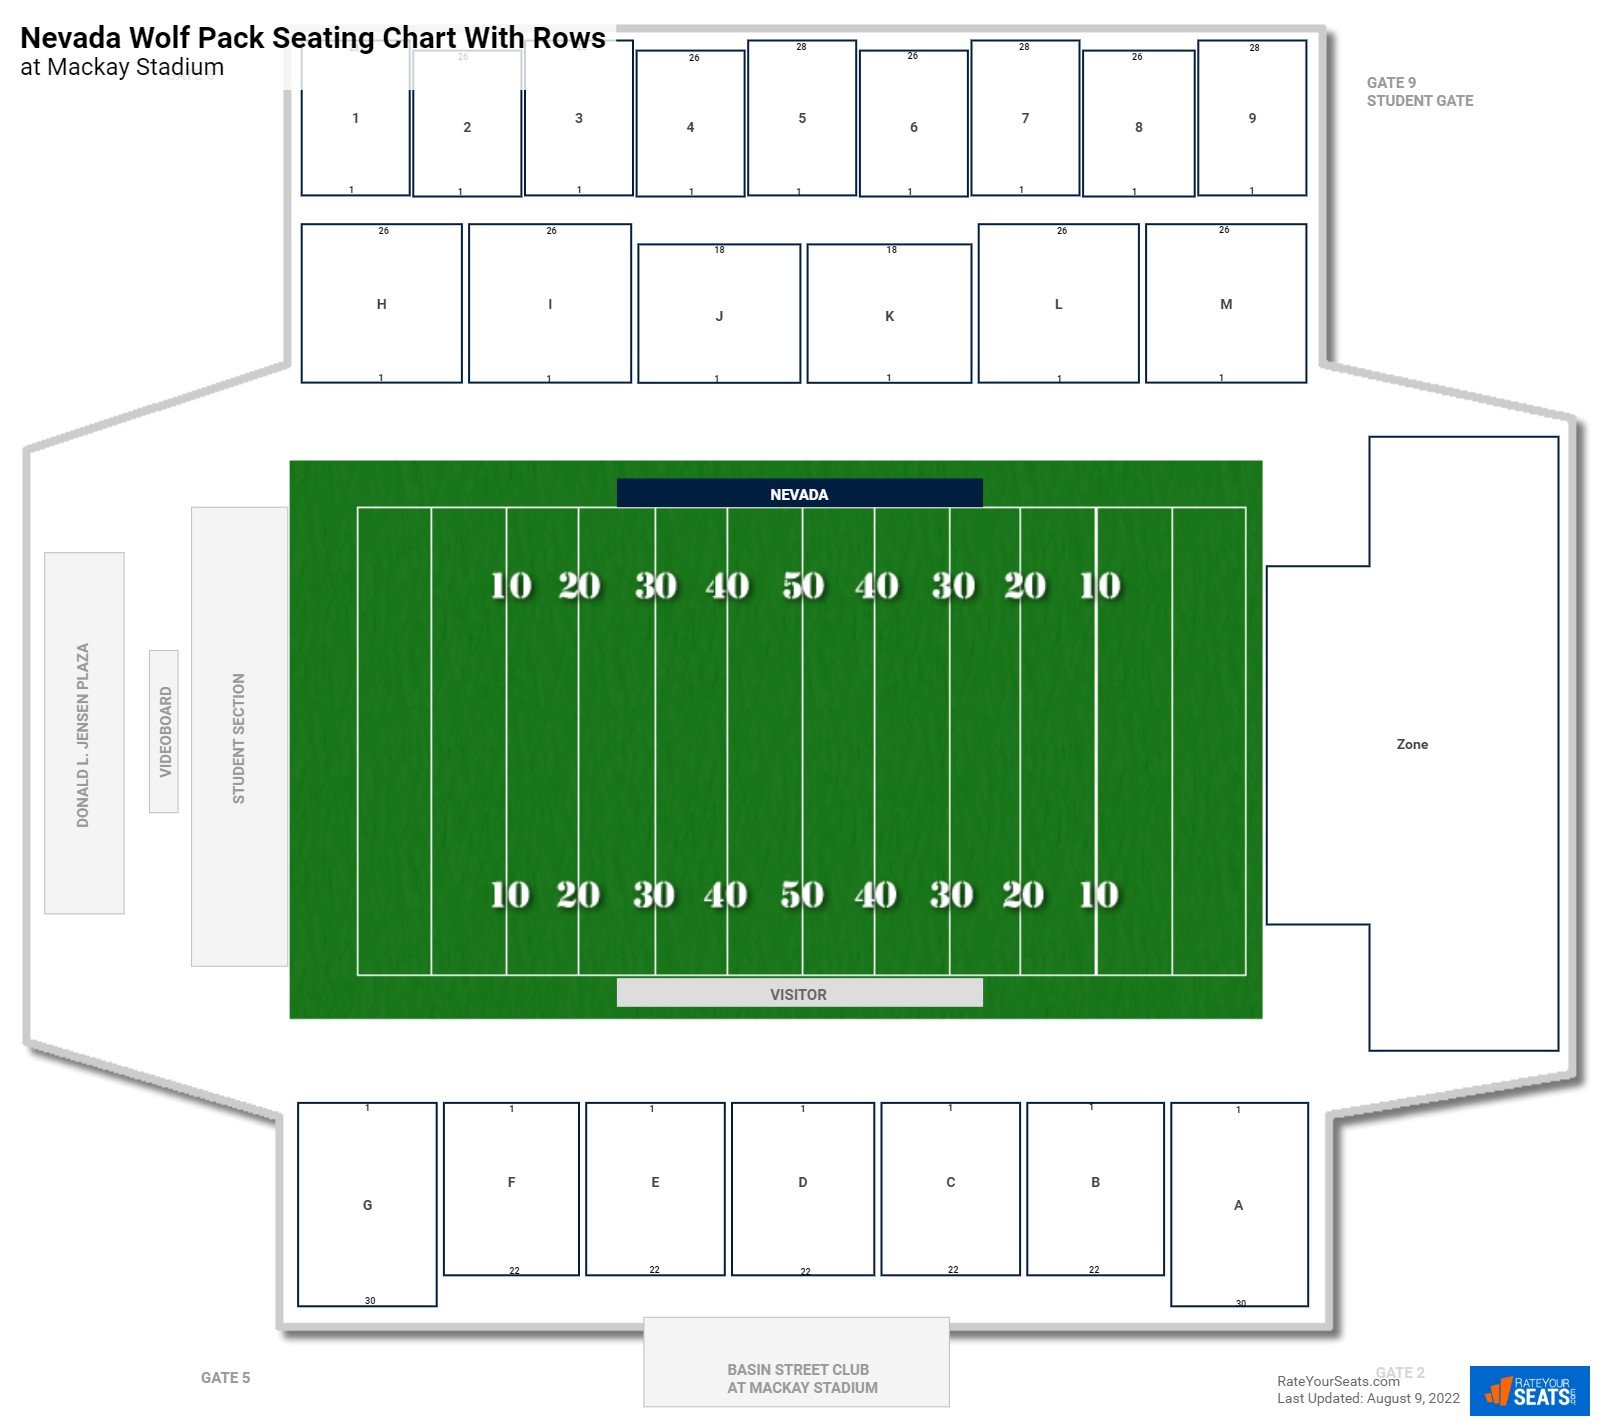 Mackay Stadium seating chart with row numbers